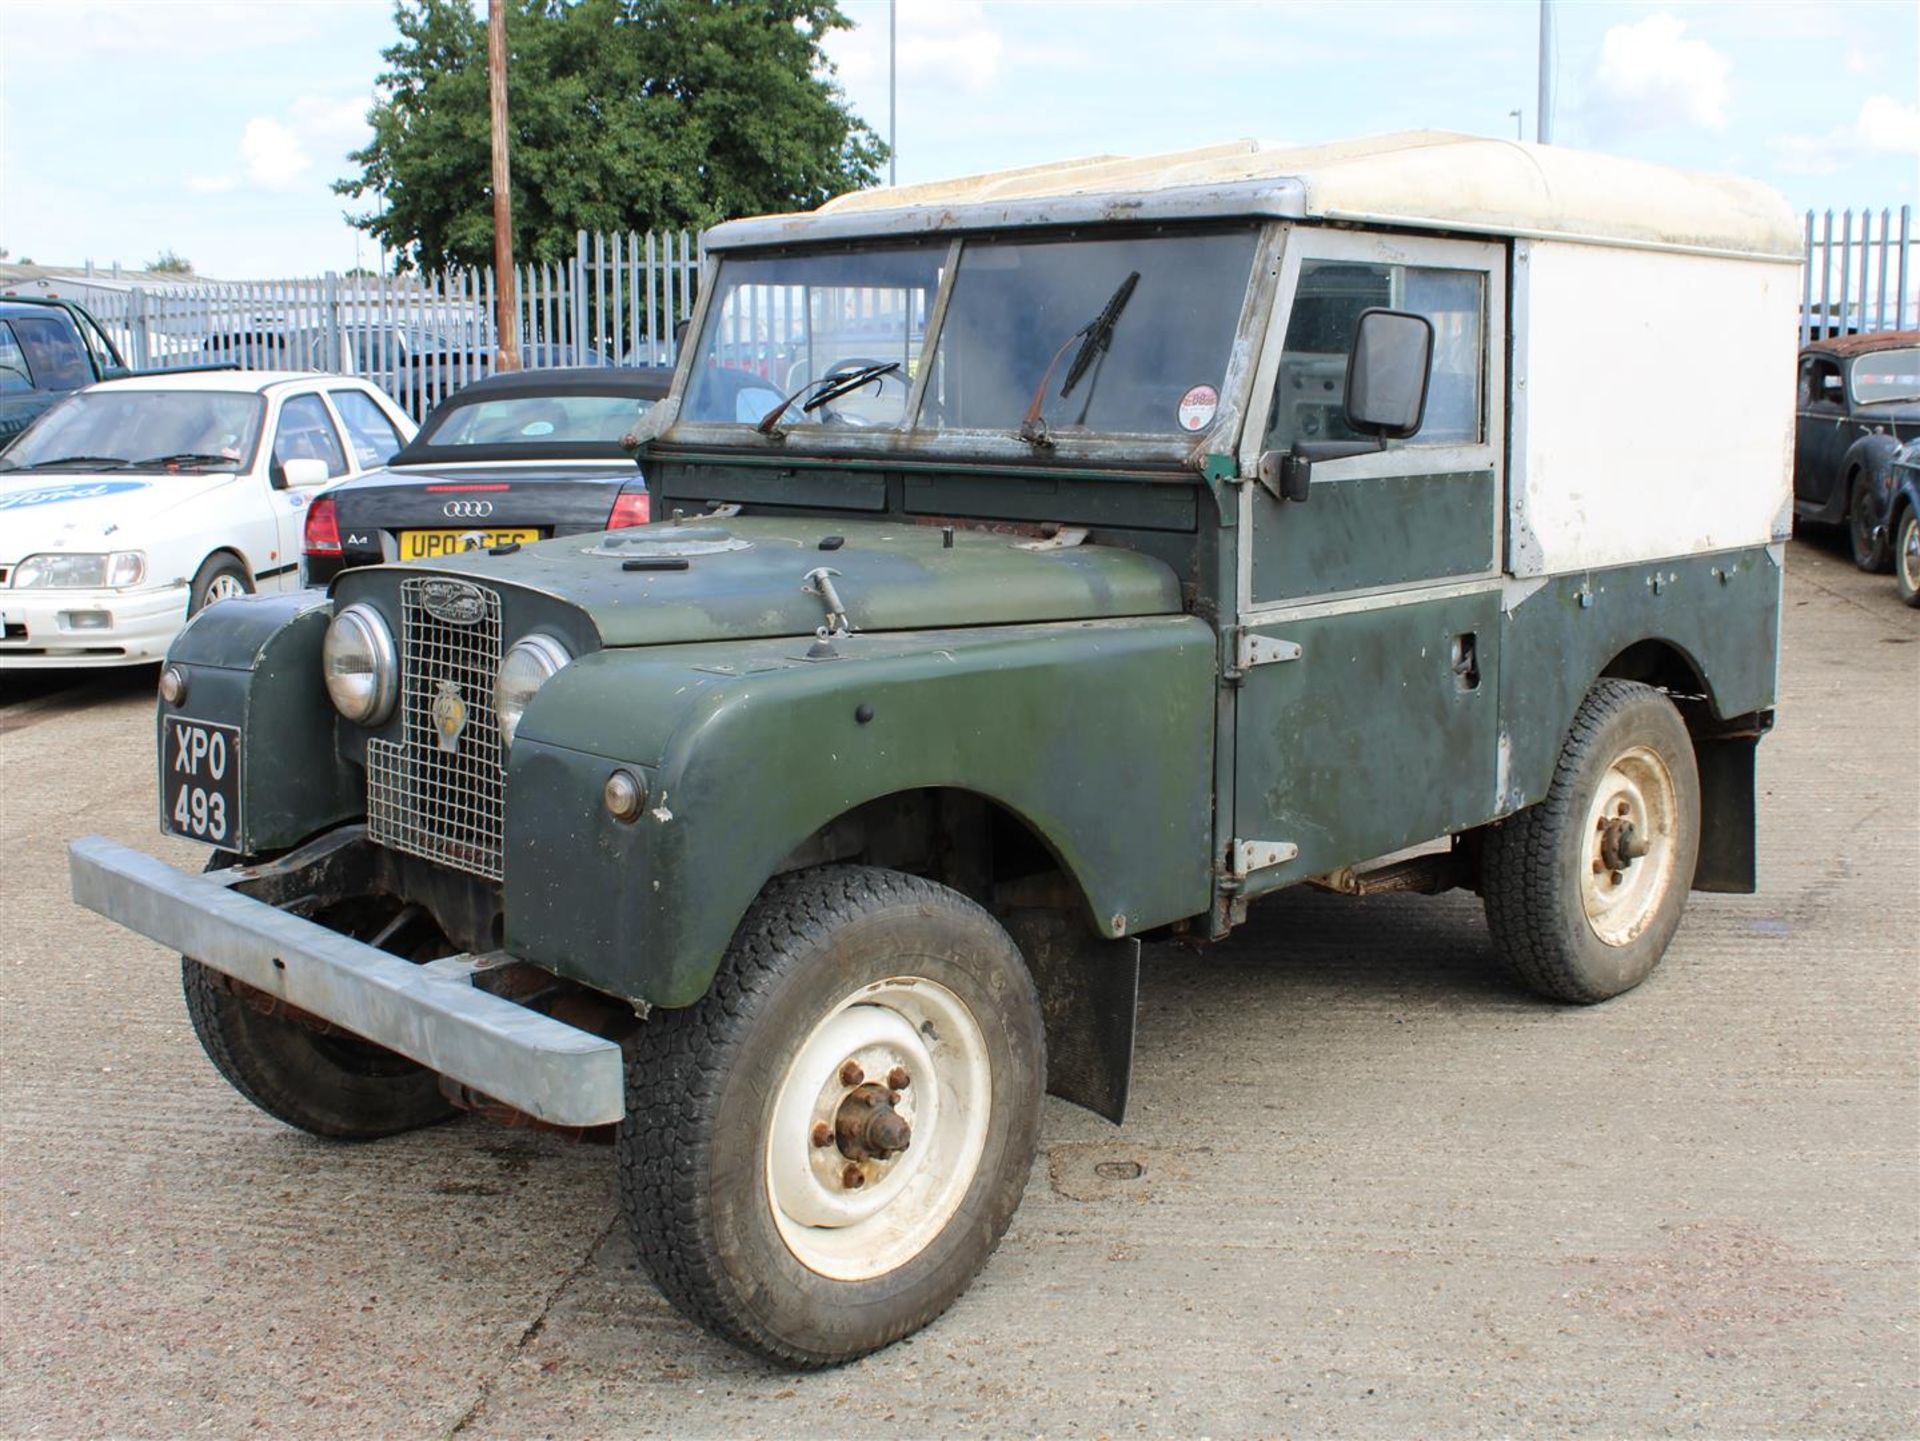 1957 Land Rover 88 Series I" - Image 3 of 26